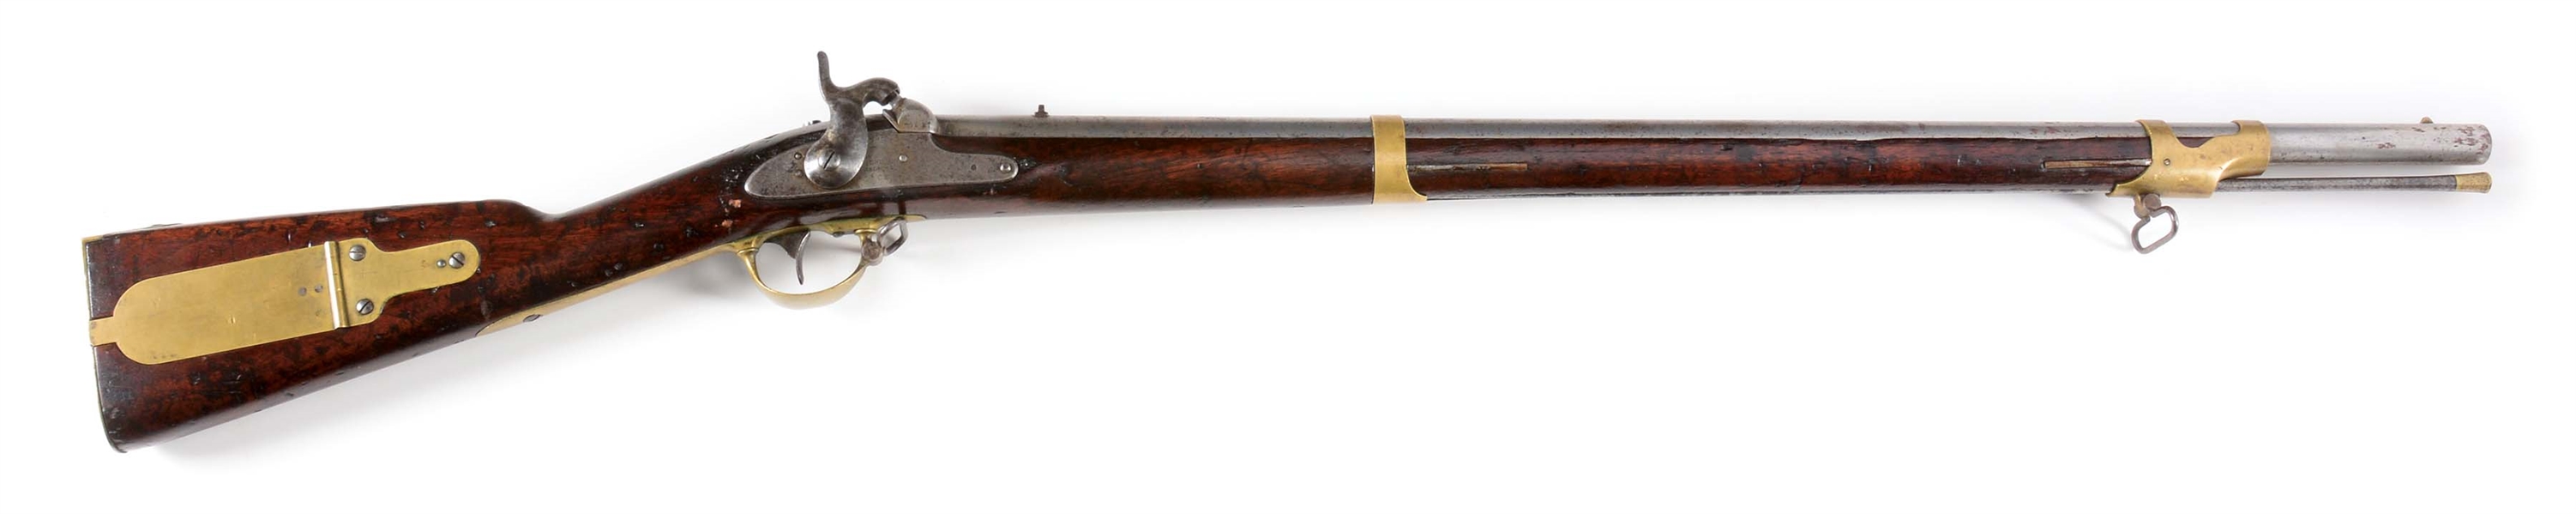 (A) 1841 MISSISSIPPI RIFLE WITH CONFEDERATE DICKSON NELSON & CO ALABAMA 1864 LOCK.